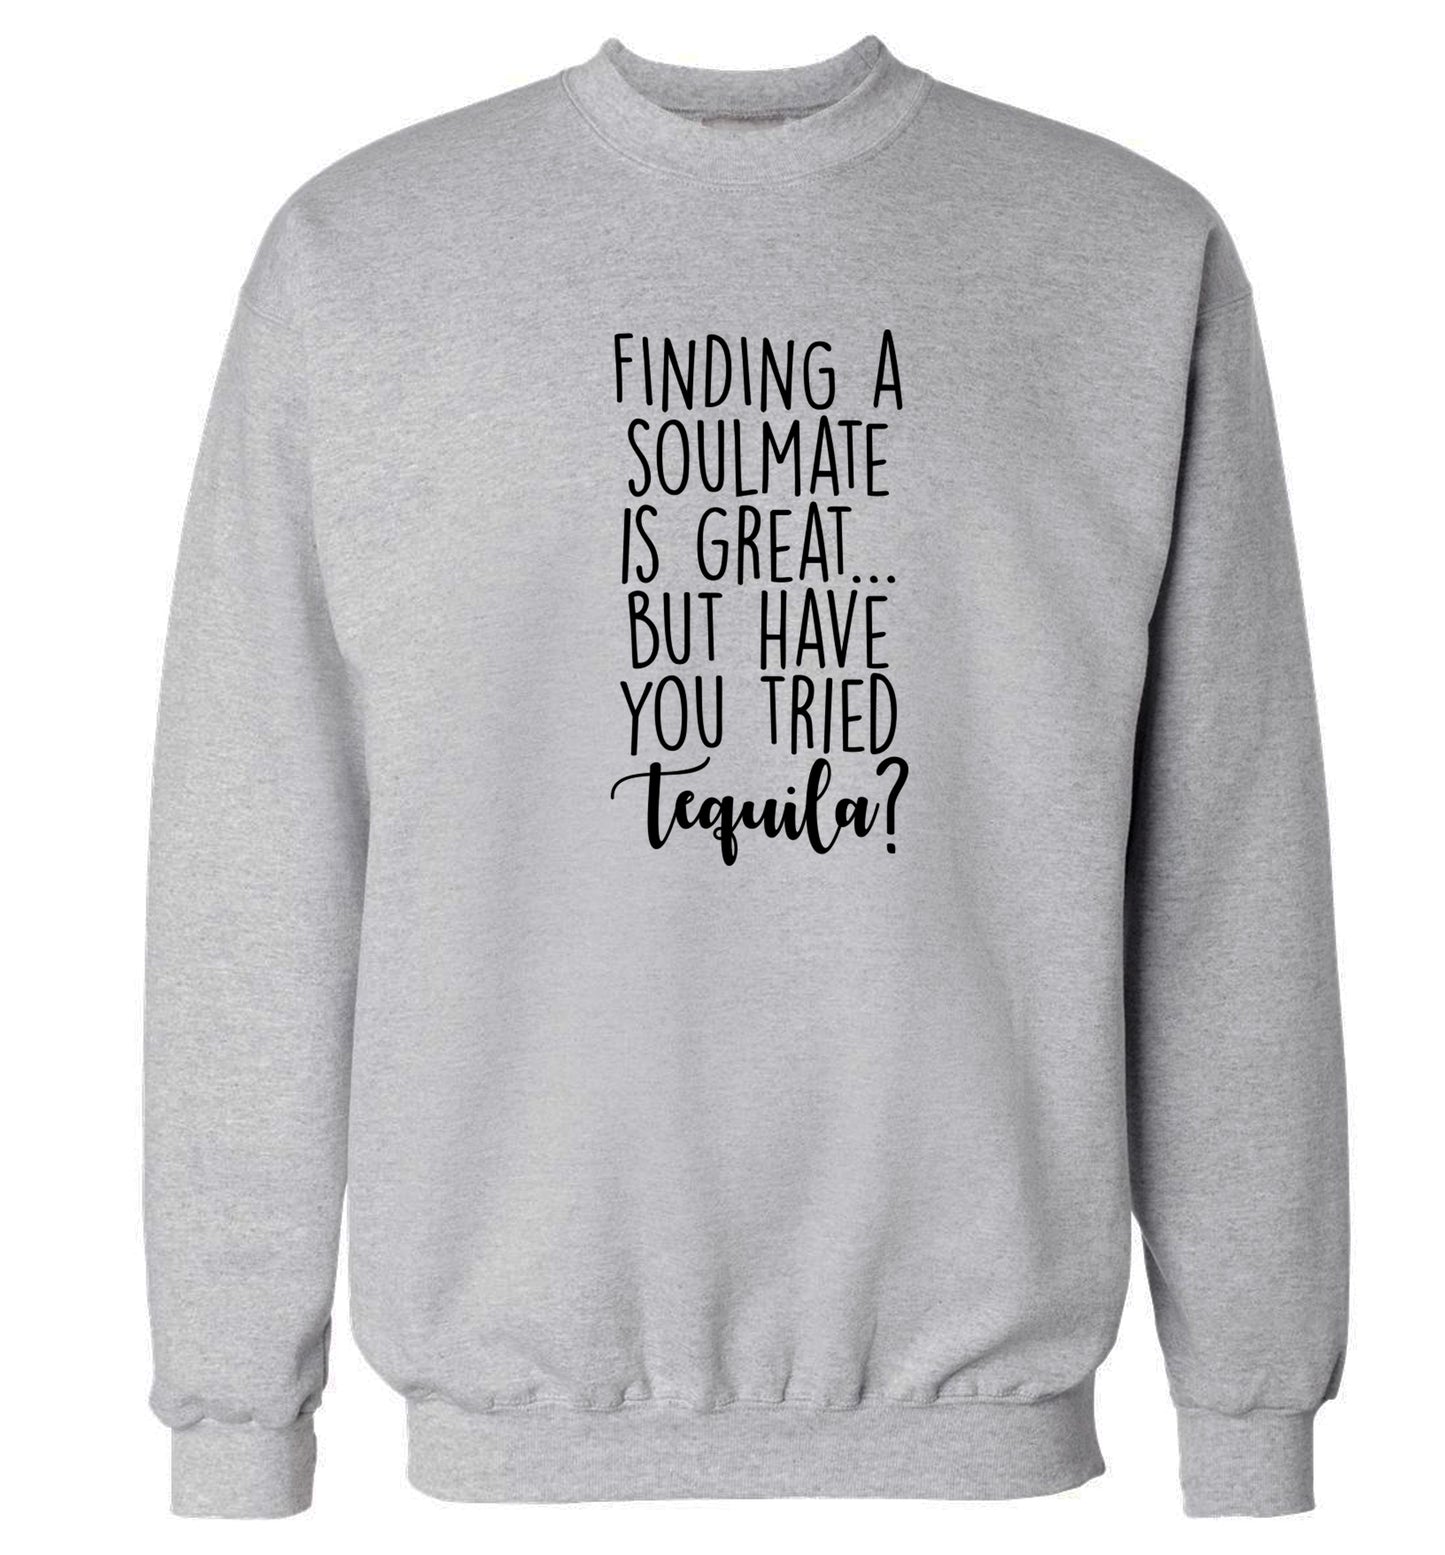 Finding a soulmate is great but have you tried tequila? Adult's unisex grey Sweater 2XL